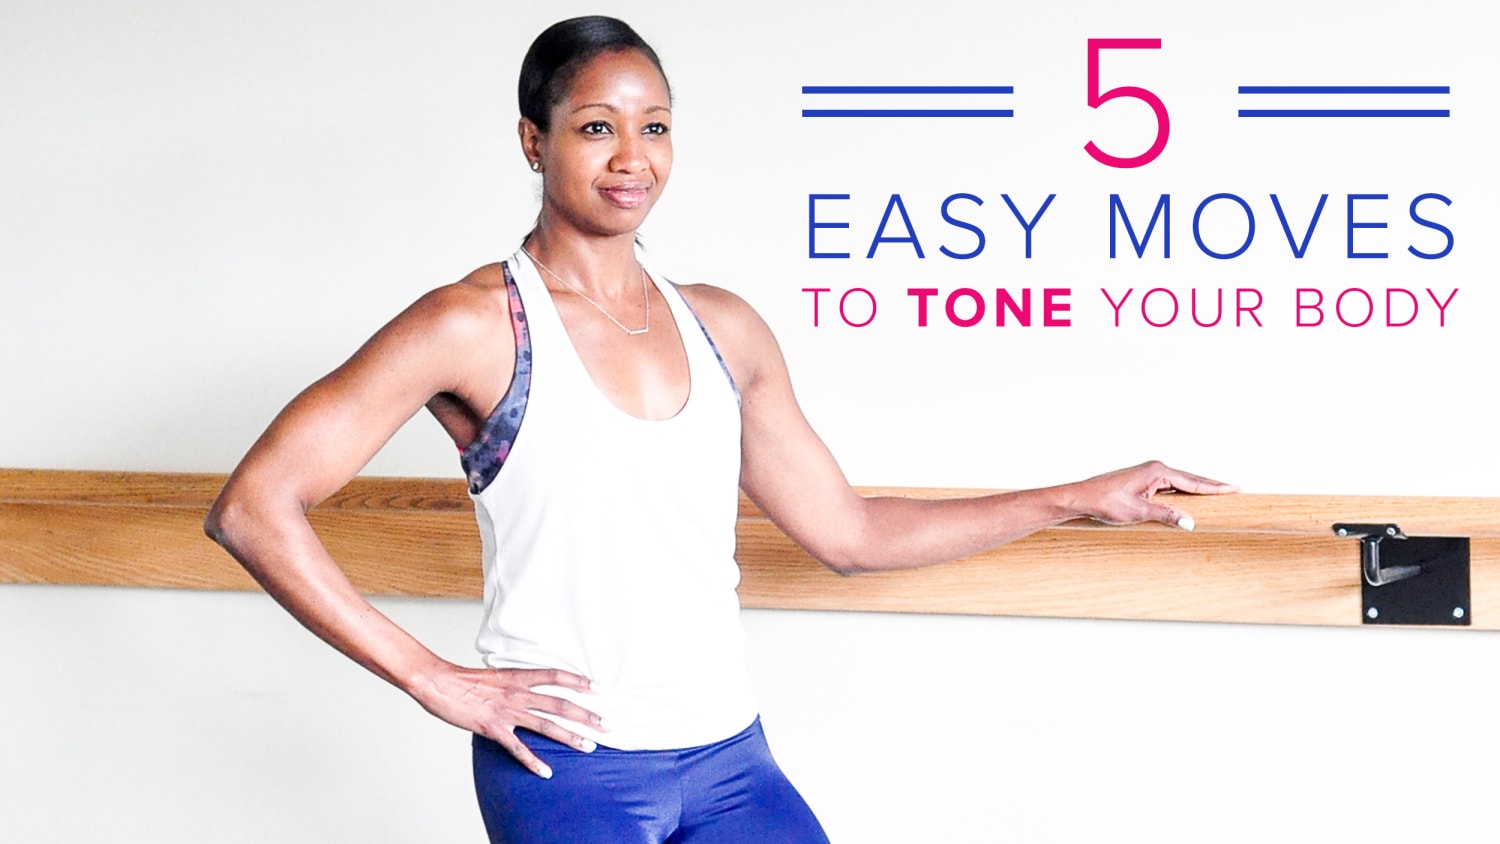 Billedhugger Charles Keasing Gøre husarbejde 5 easy moves to tone your body